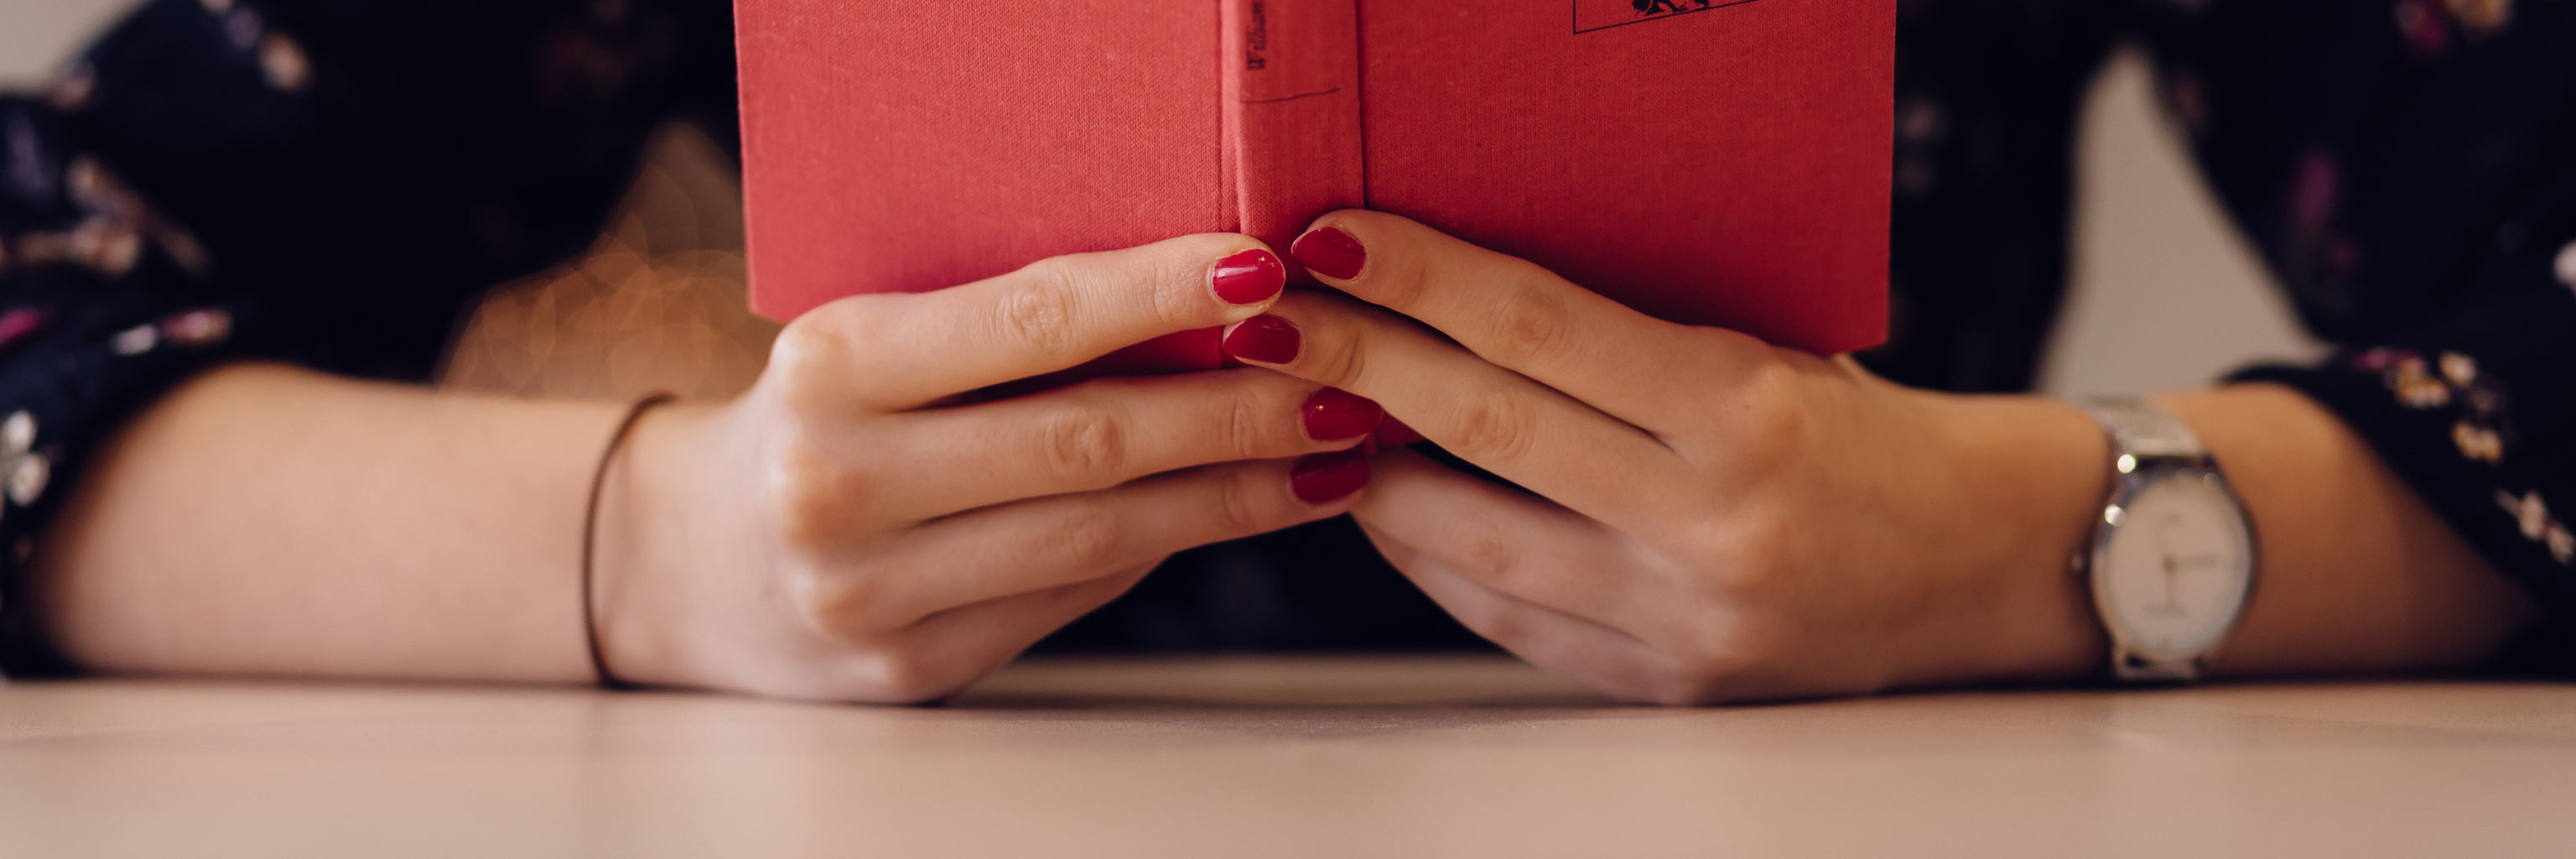 female hands holding an open book upright